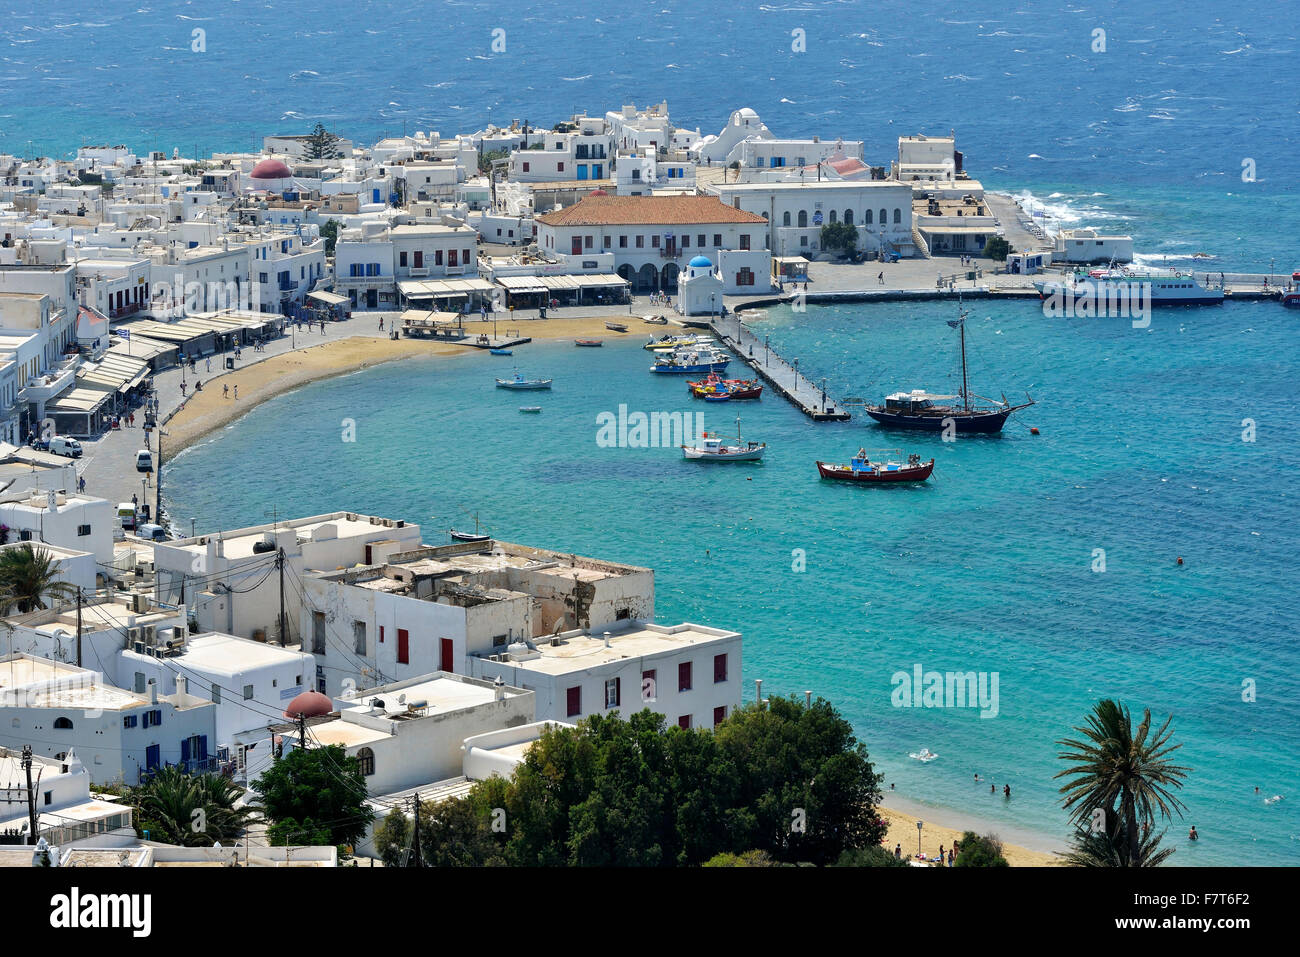 View of the harbor of Mykonos Town or Chora, Mykonos, Cyclades, Greece Stock Photo